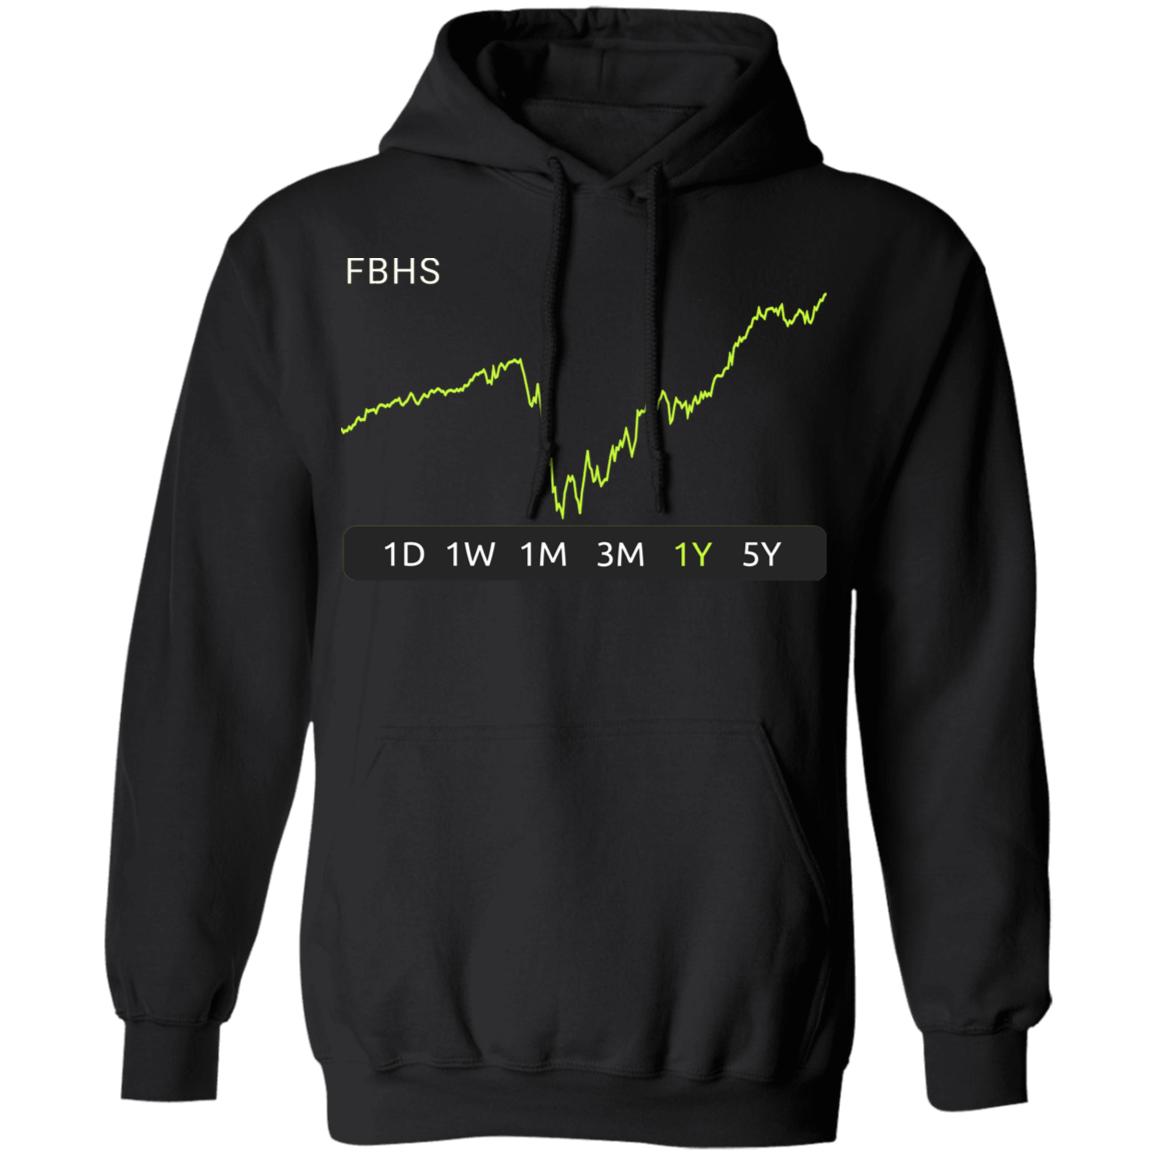 FBHS Stock 1y Pullover Hoodie